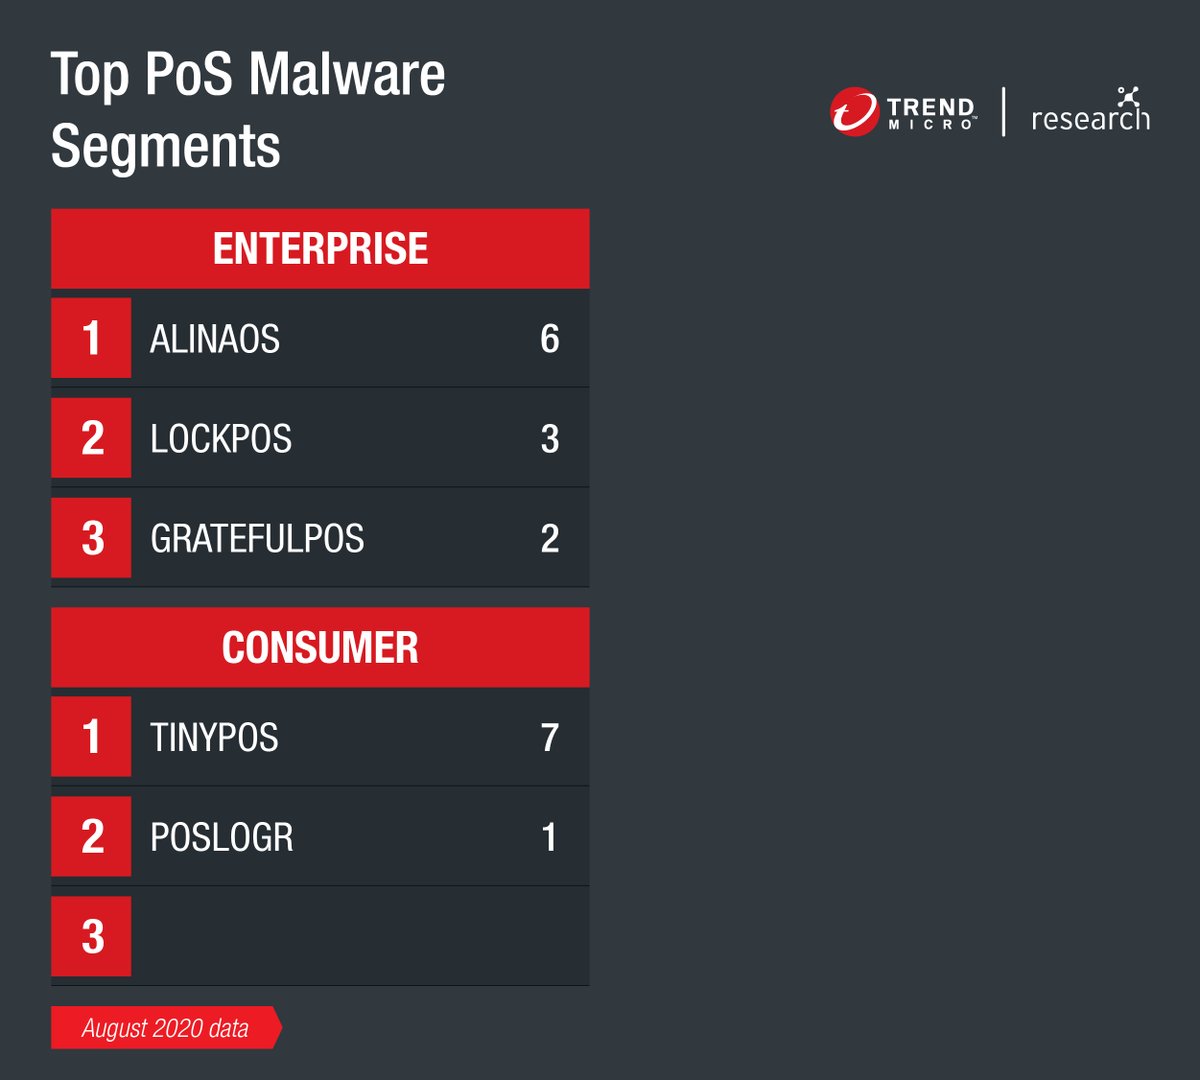 In our August  #FastFacts report,  #TinyPOS took the top spot as the most detected  #PoS malware family under the Consumer segment. However, the Enterprise segment still covered a considerable portion of PoS malware detections, with a total of 11 detections.